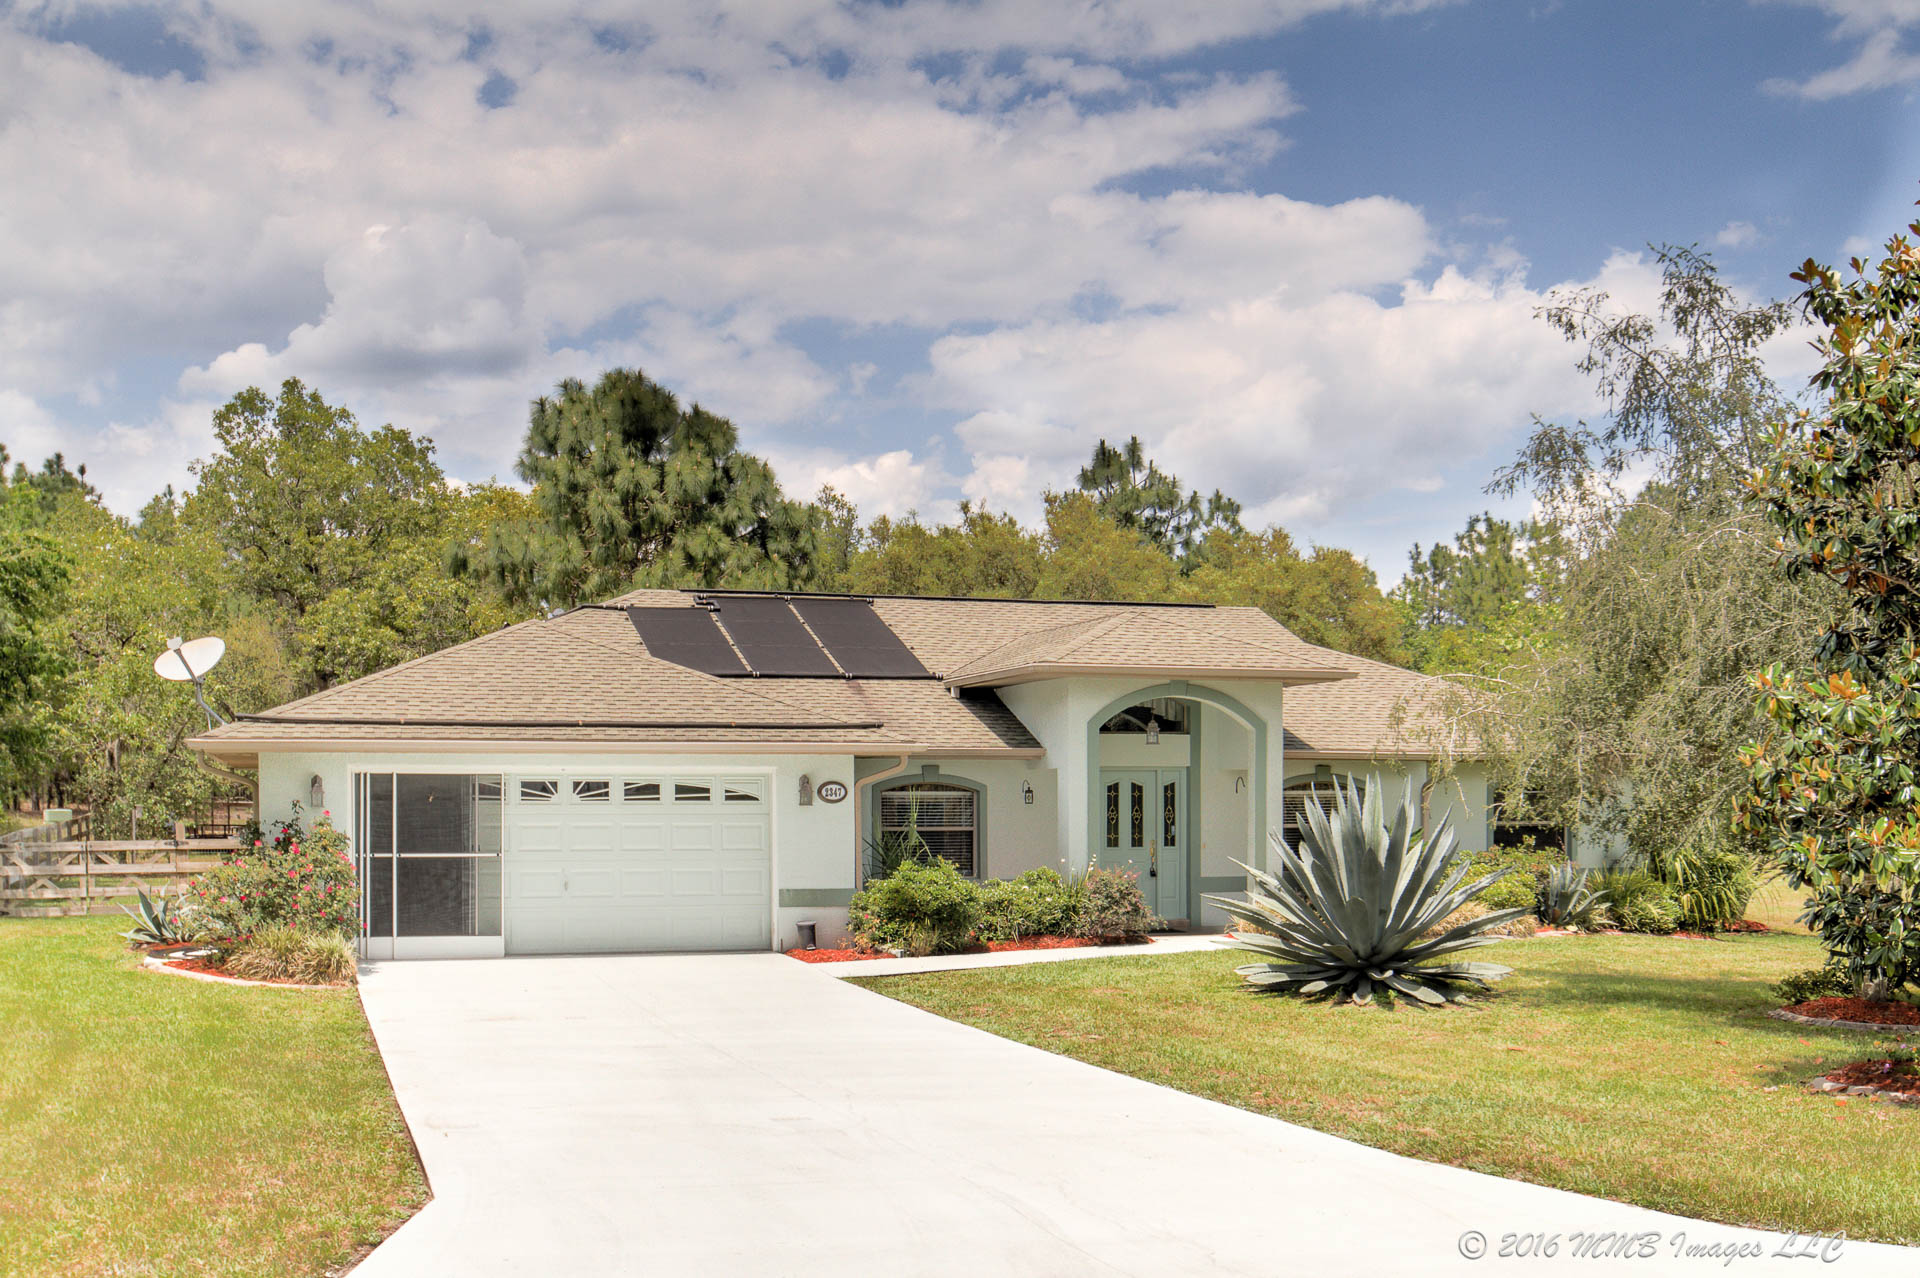 3D Tour of the Citrus Hills Home for Sale in Citrus County